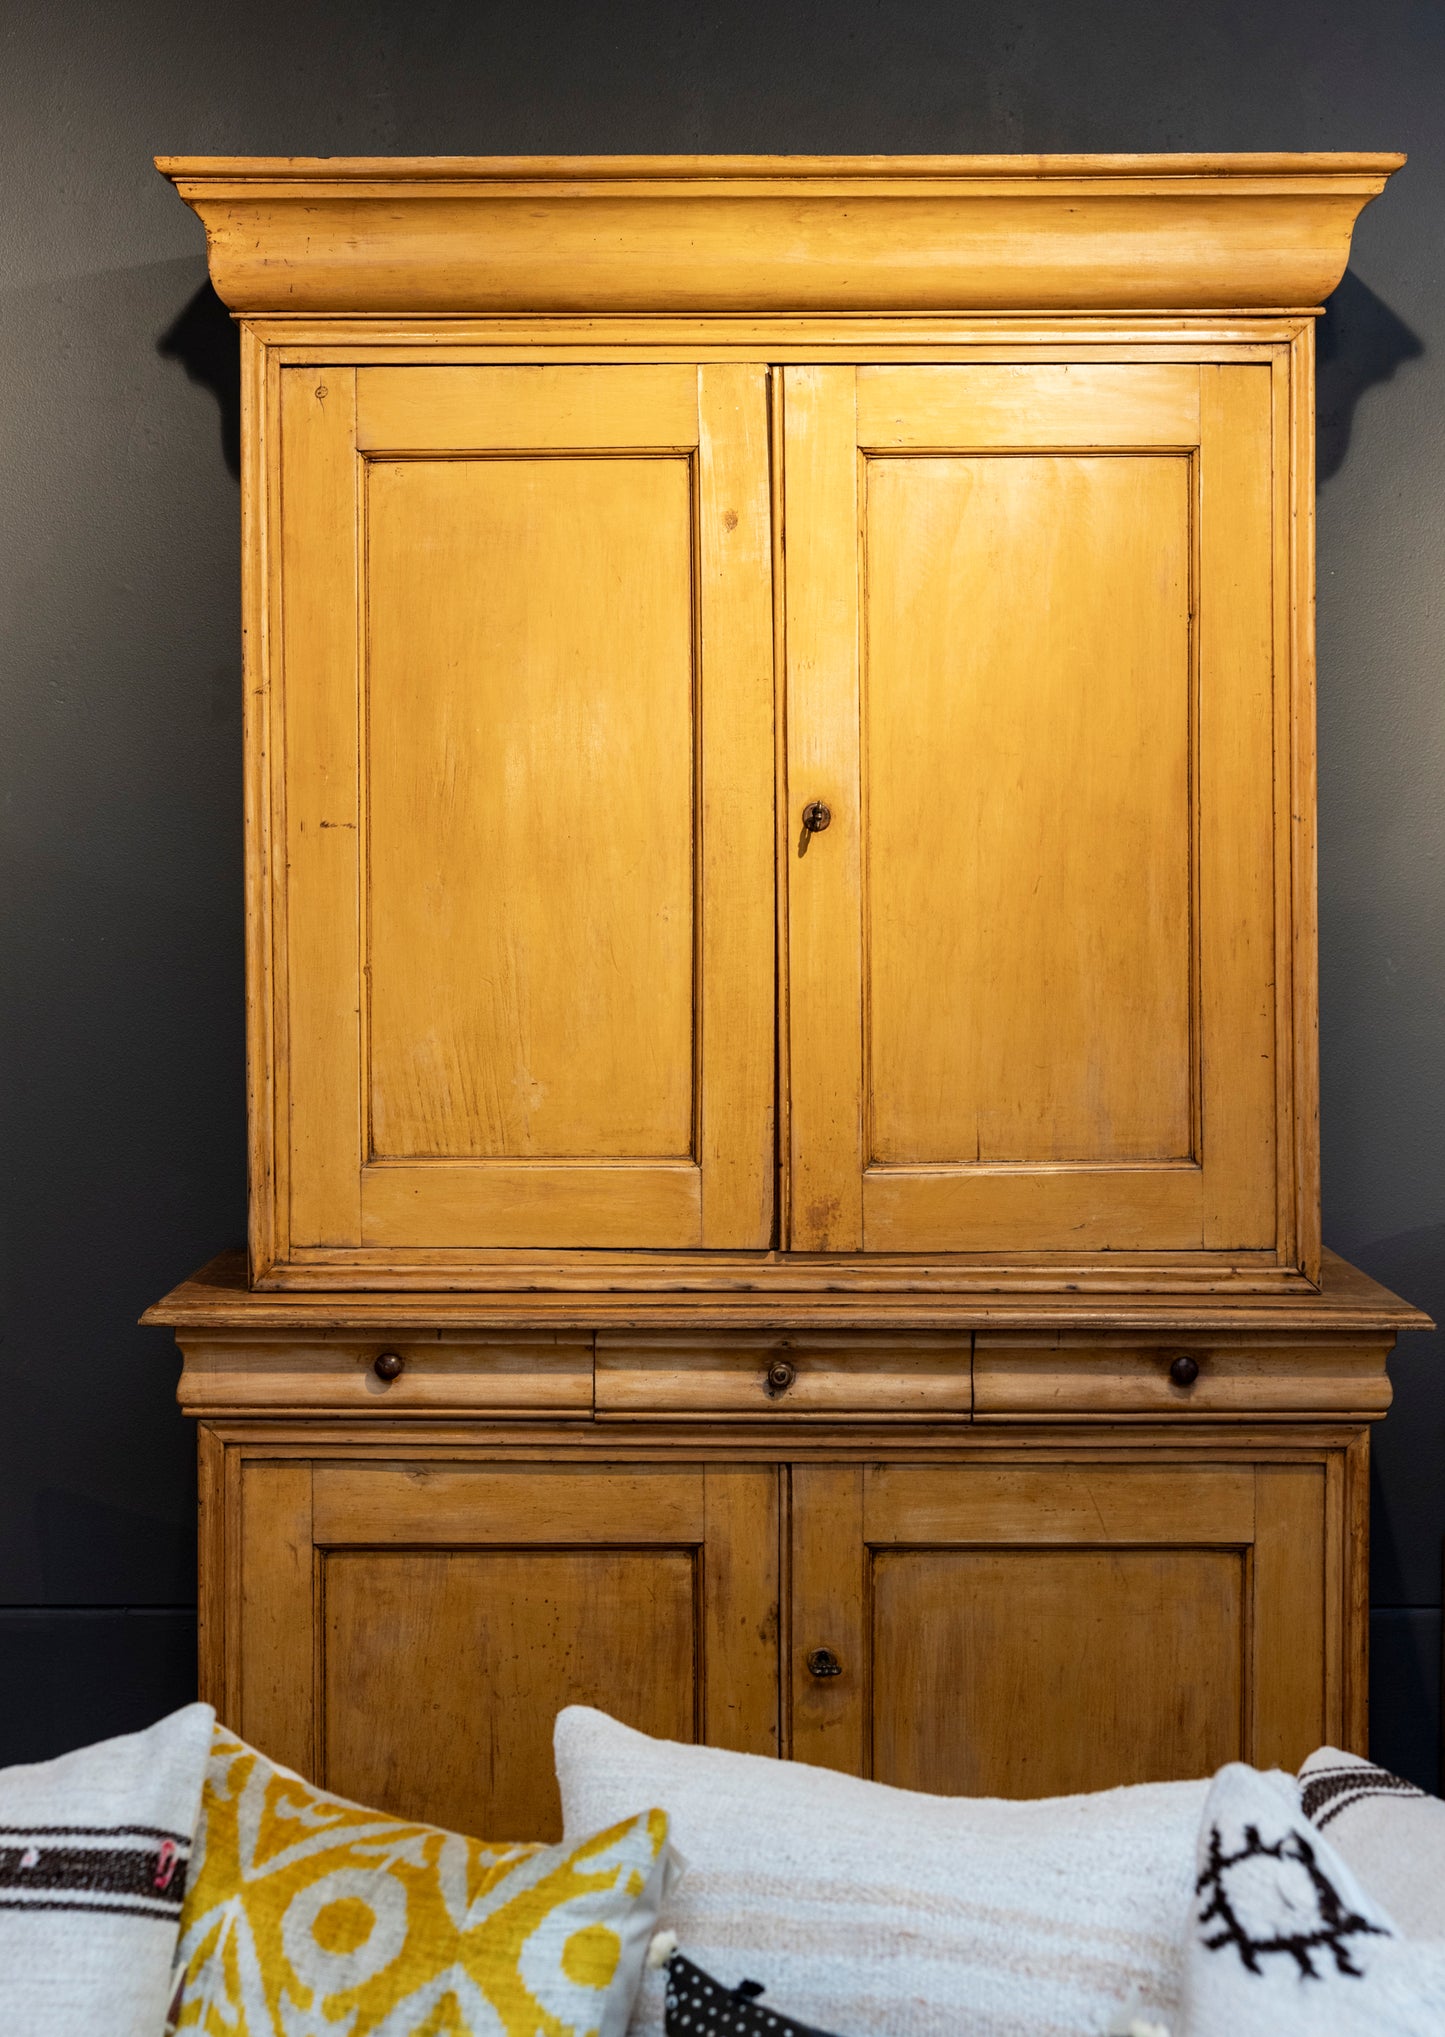 Antique French Linen Cupboard